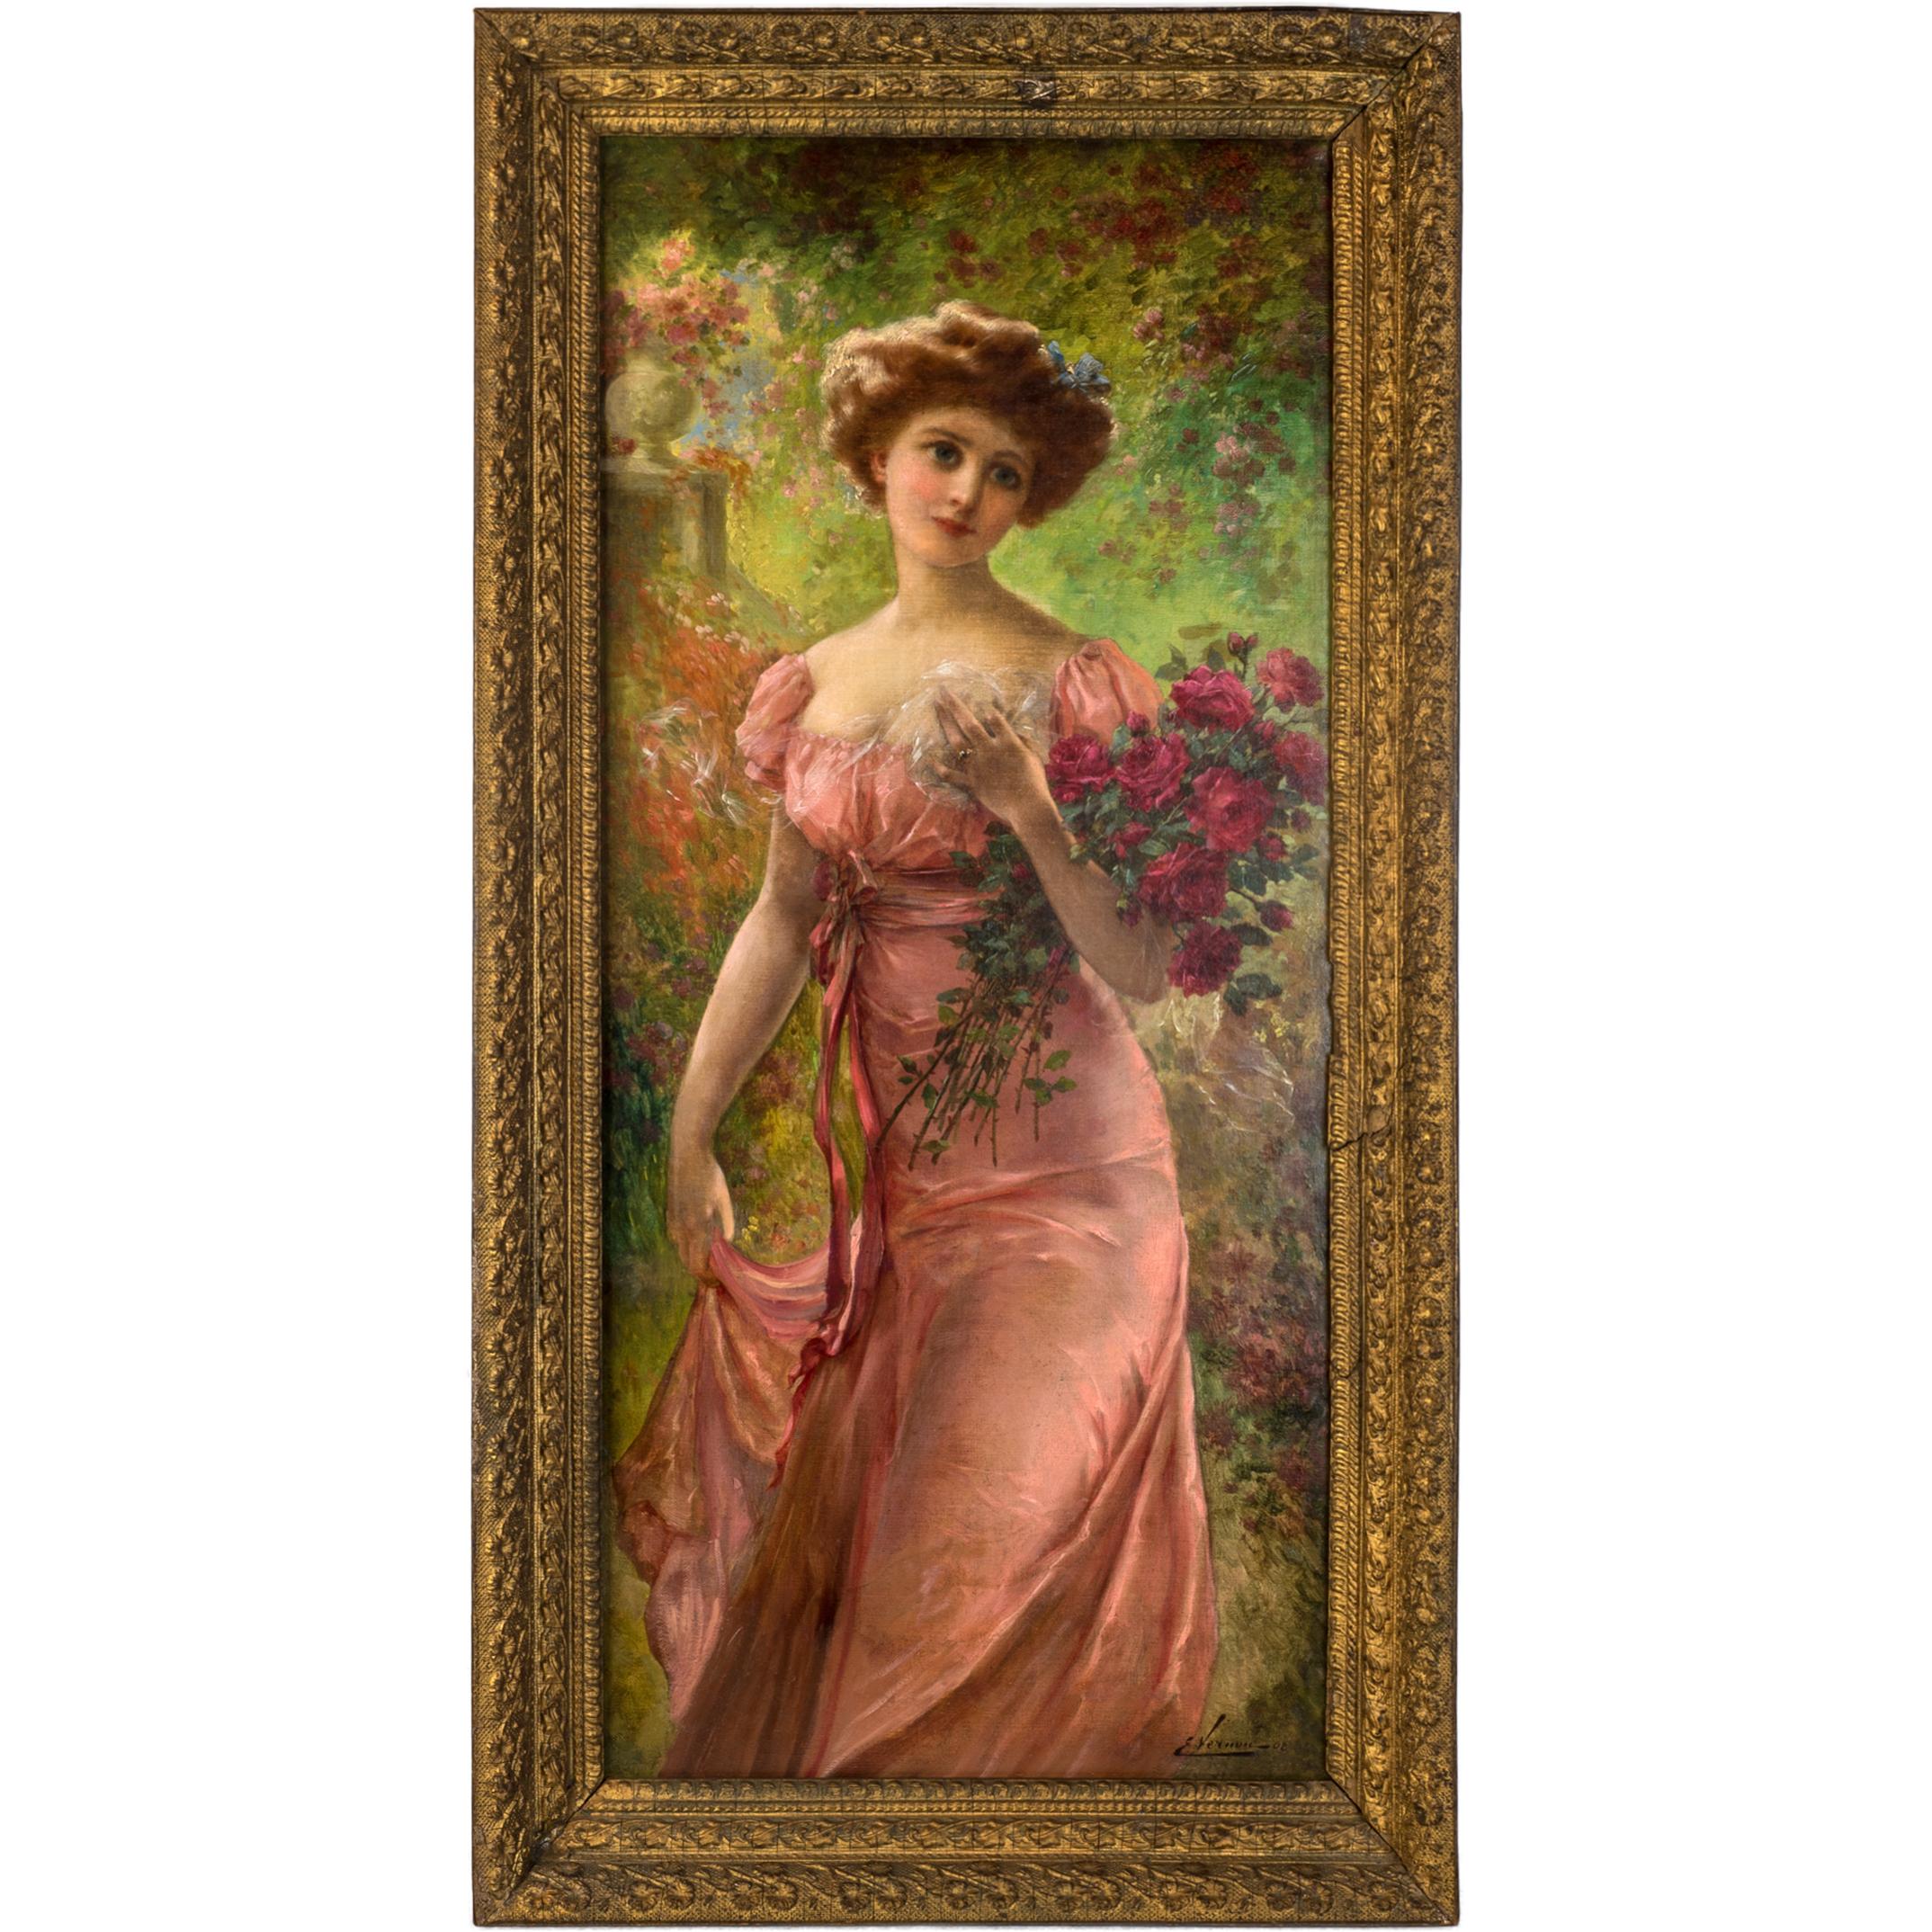 A portrait of a young woman with roses. Four old repairs to the canvas. Signed ‘E Vernon’ LR

Artist: Emile Vernon (1872-1919)
Date: Late 19th century
Origin: French
Medium: oil on canvas
Dimension: Canvas: 30 in. x 13 in.; frame: 16 1/4 in. x